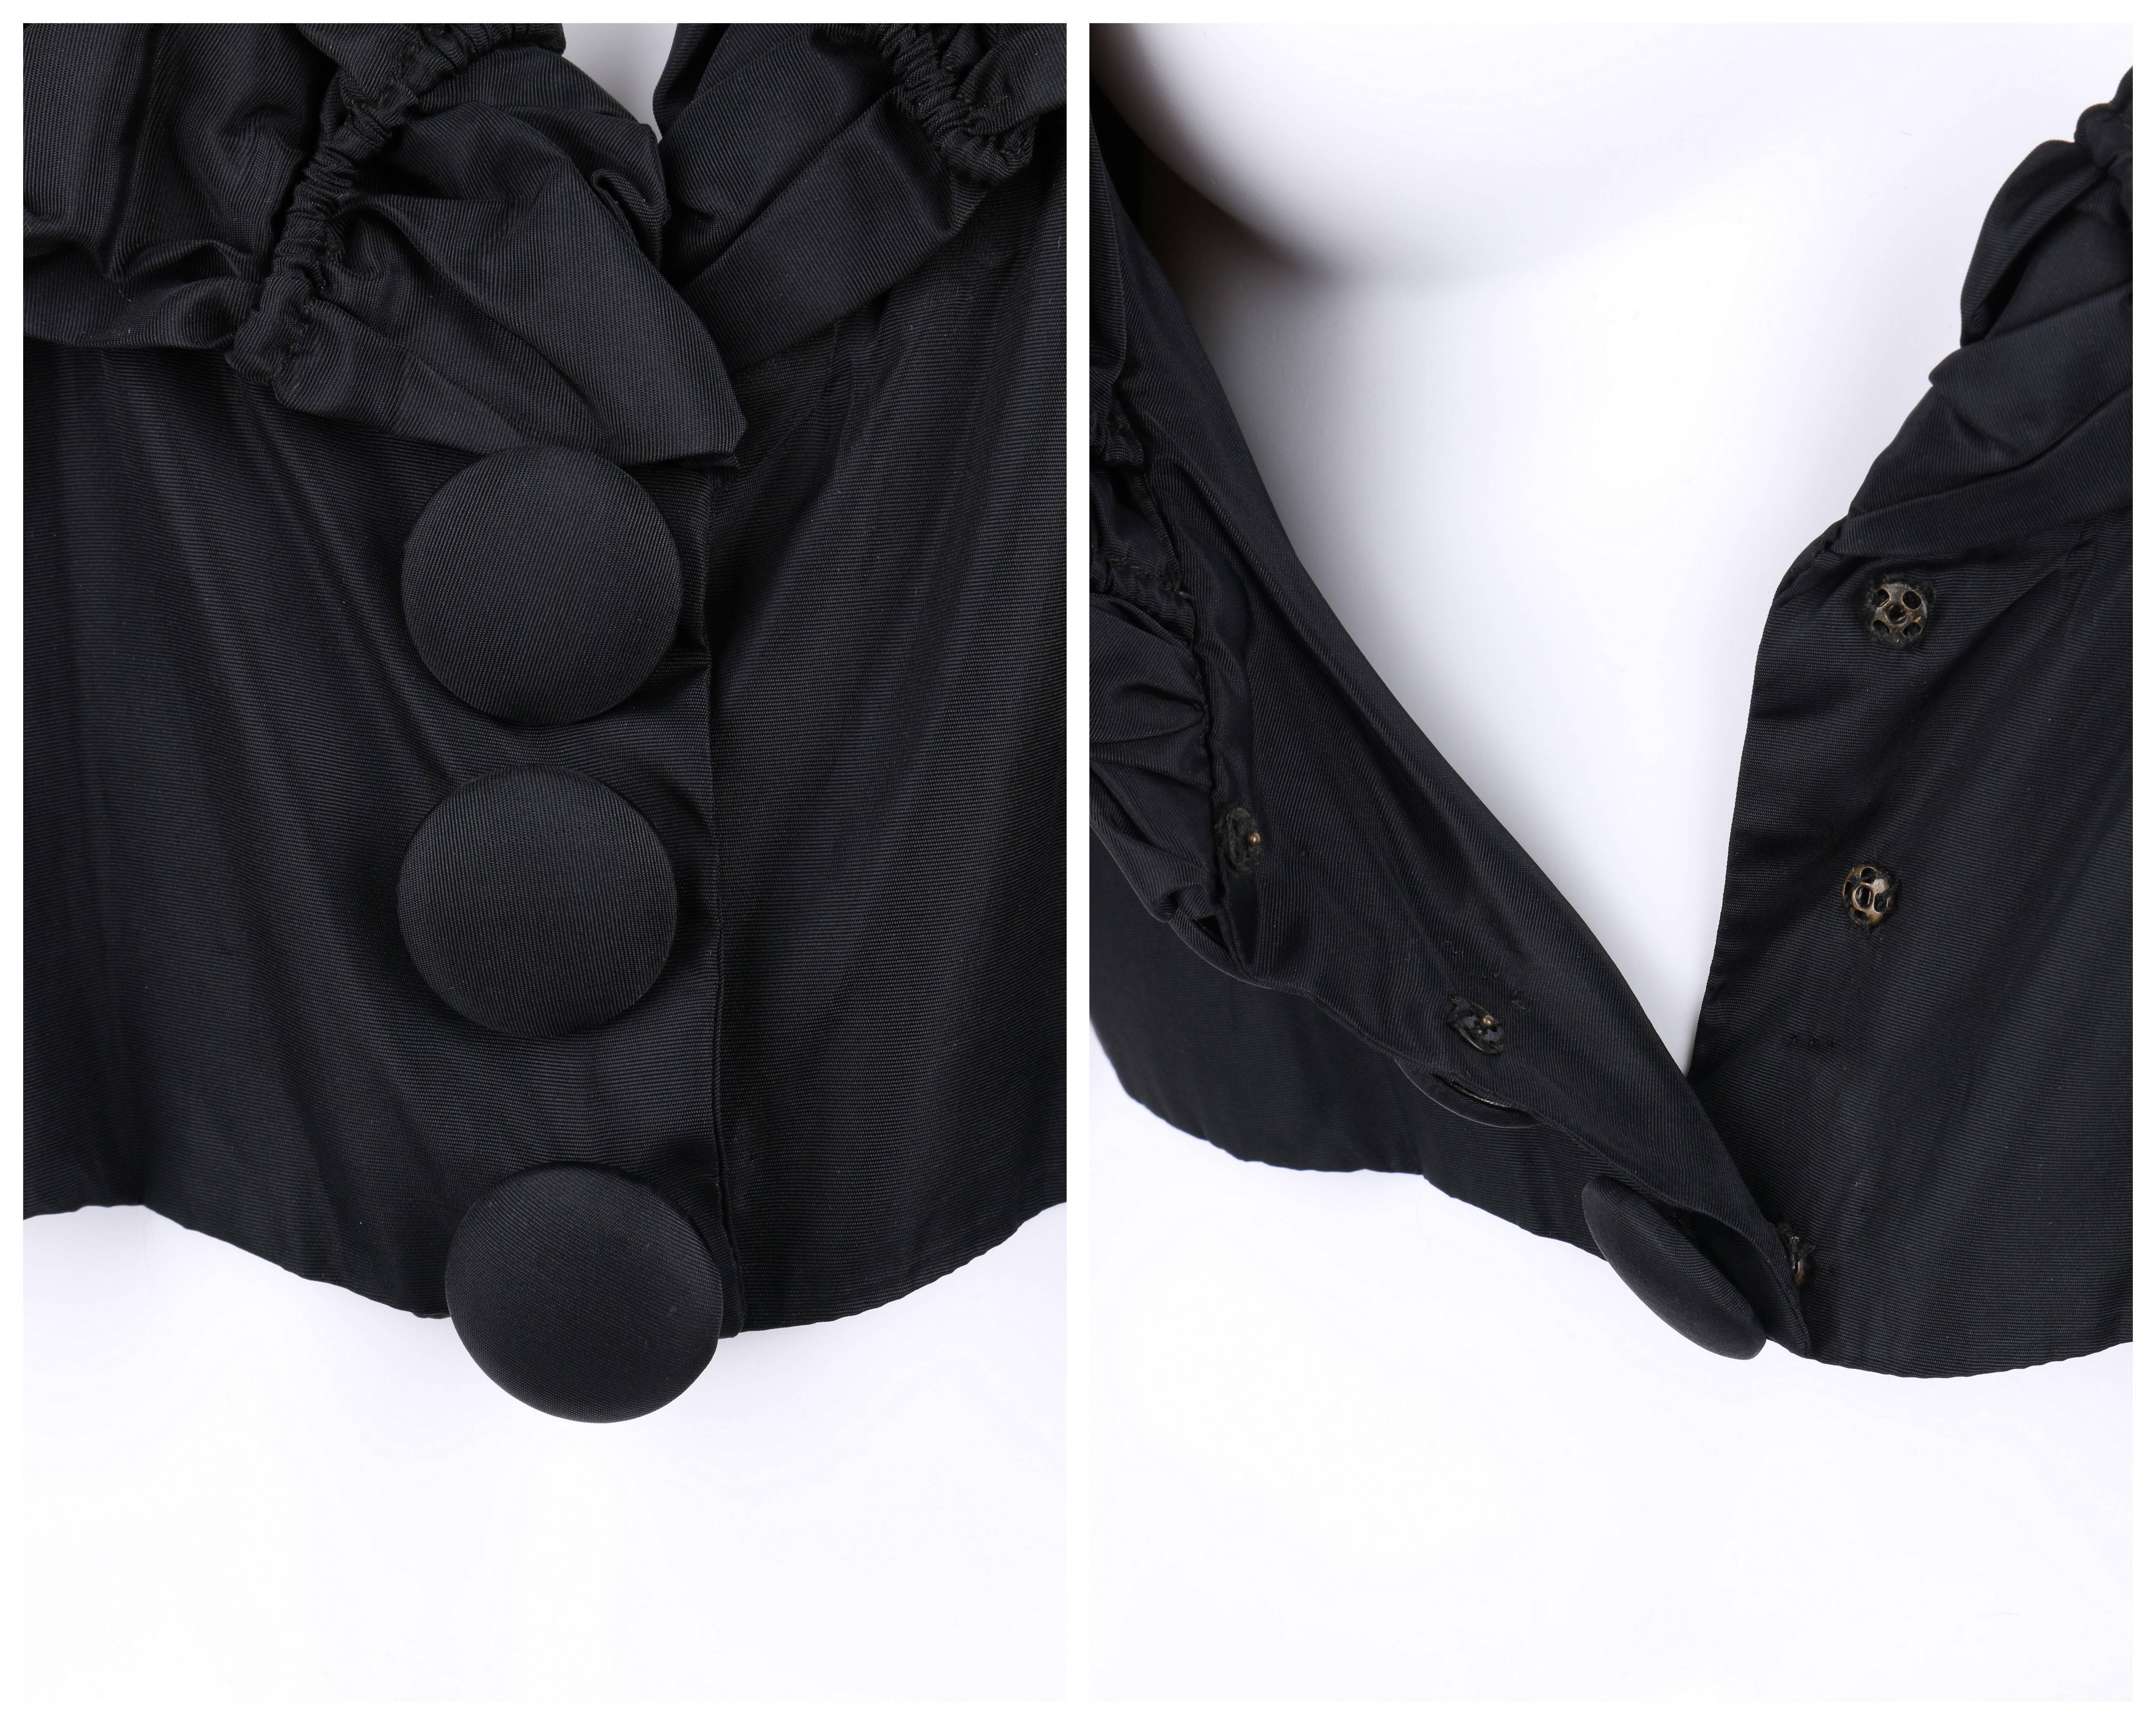 JEAN PATOU Adaptation c.1930's Black Silk Jacket Ruffled Capelet  For Sale 1